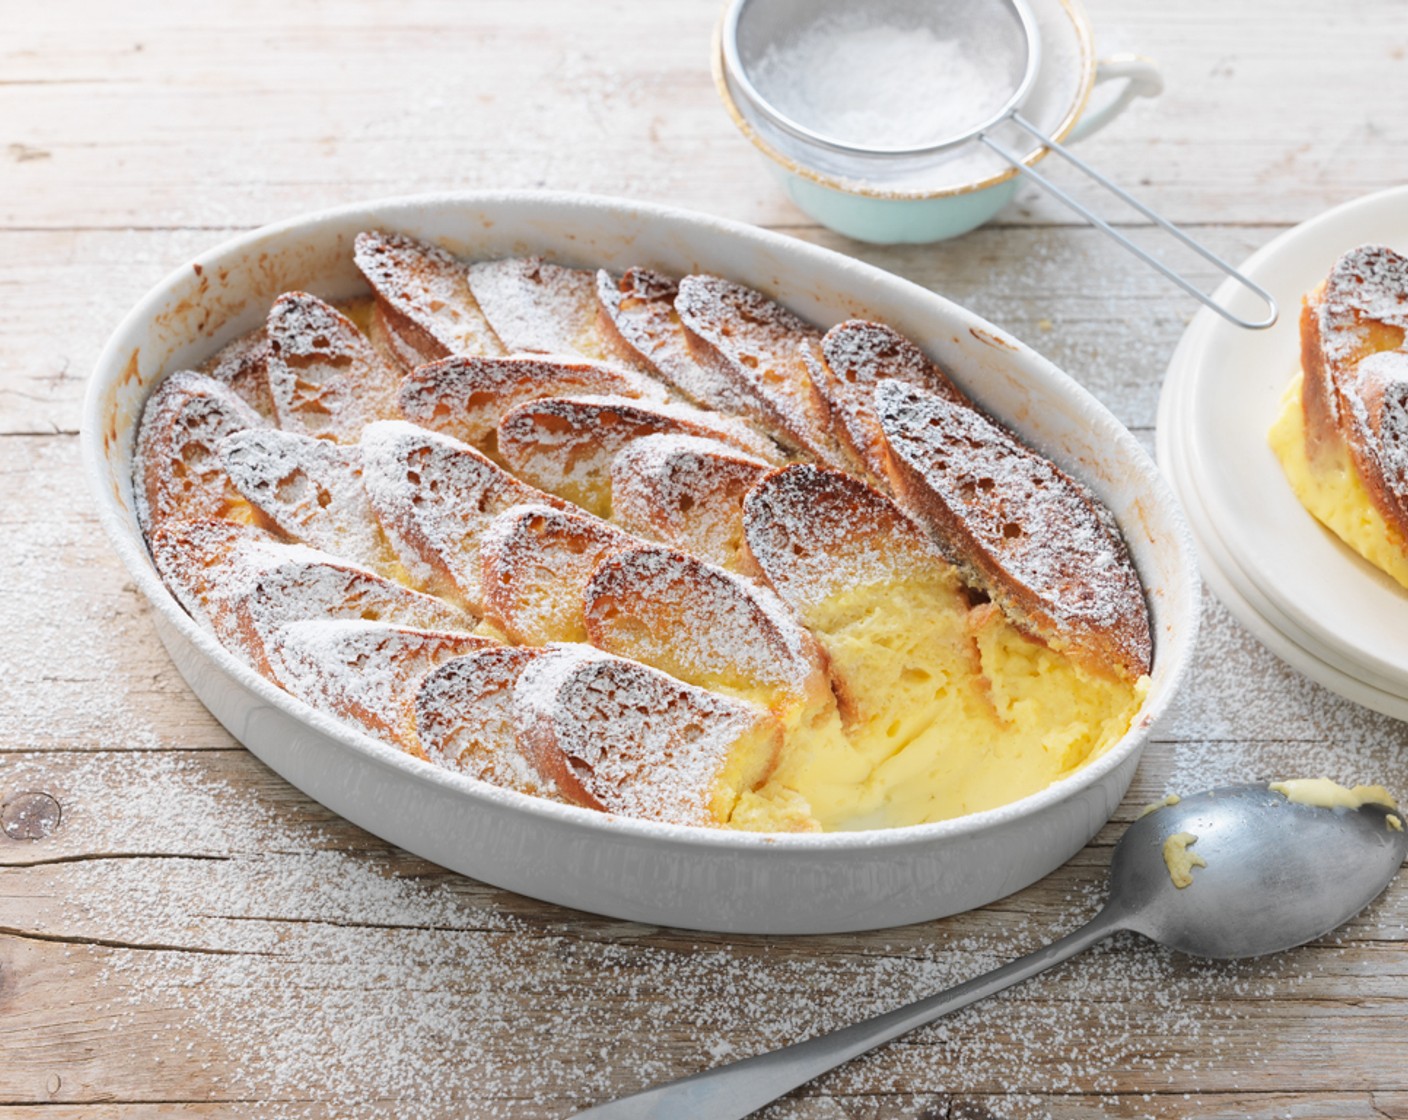 Bread 'n' Butter Pudding